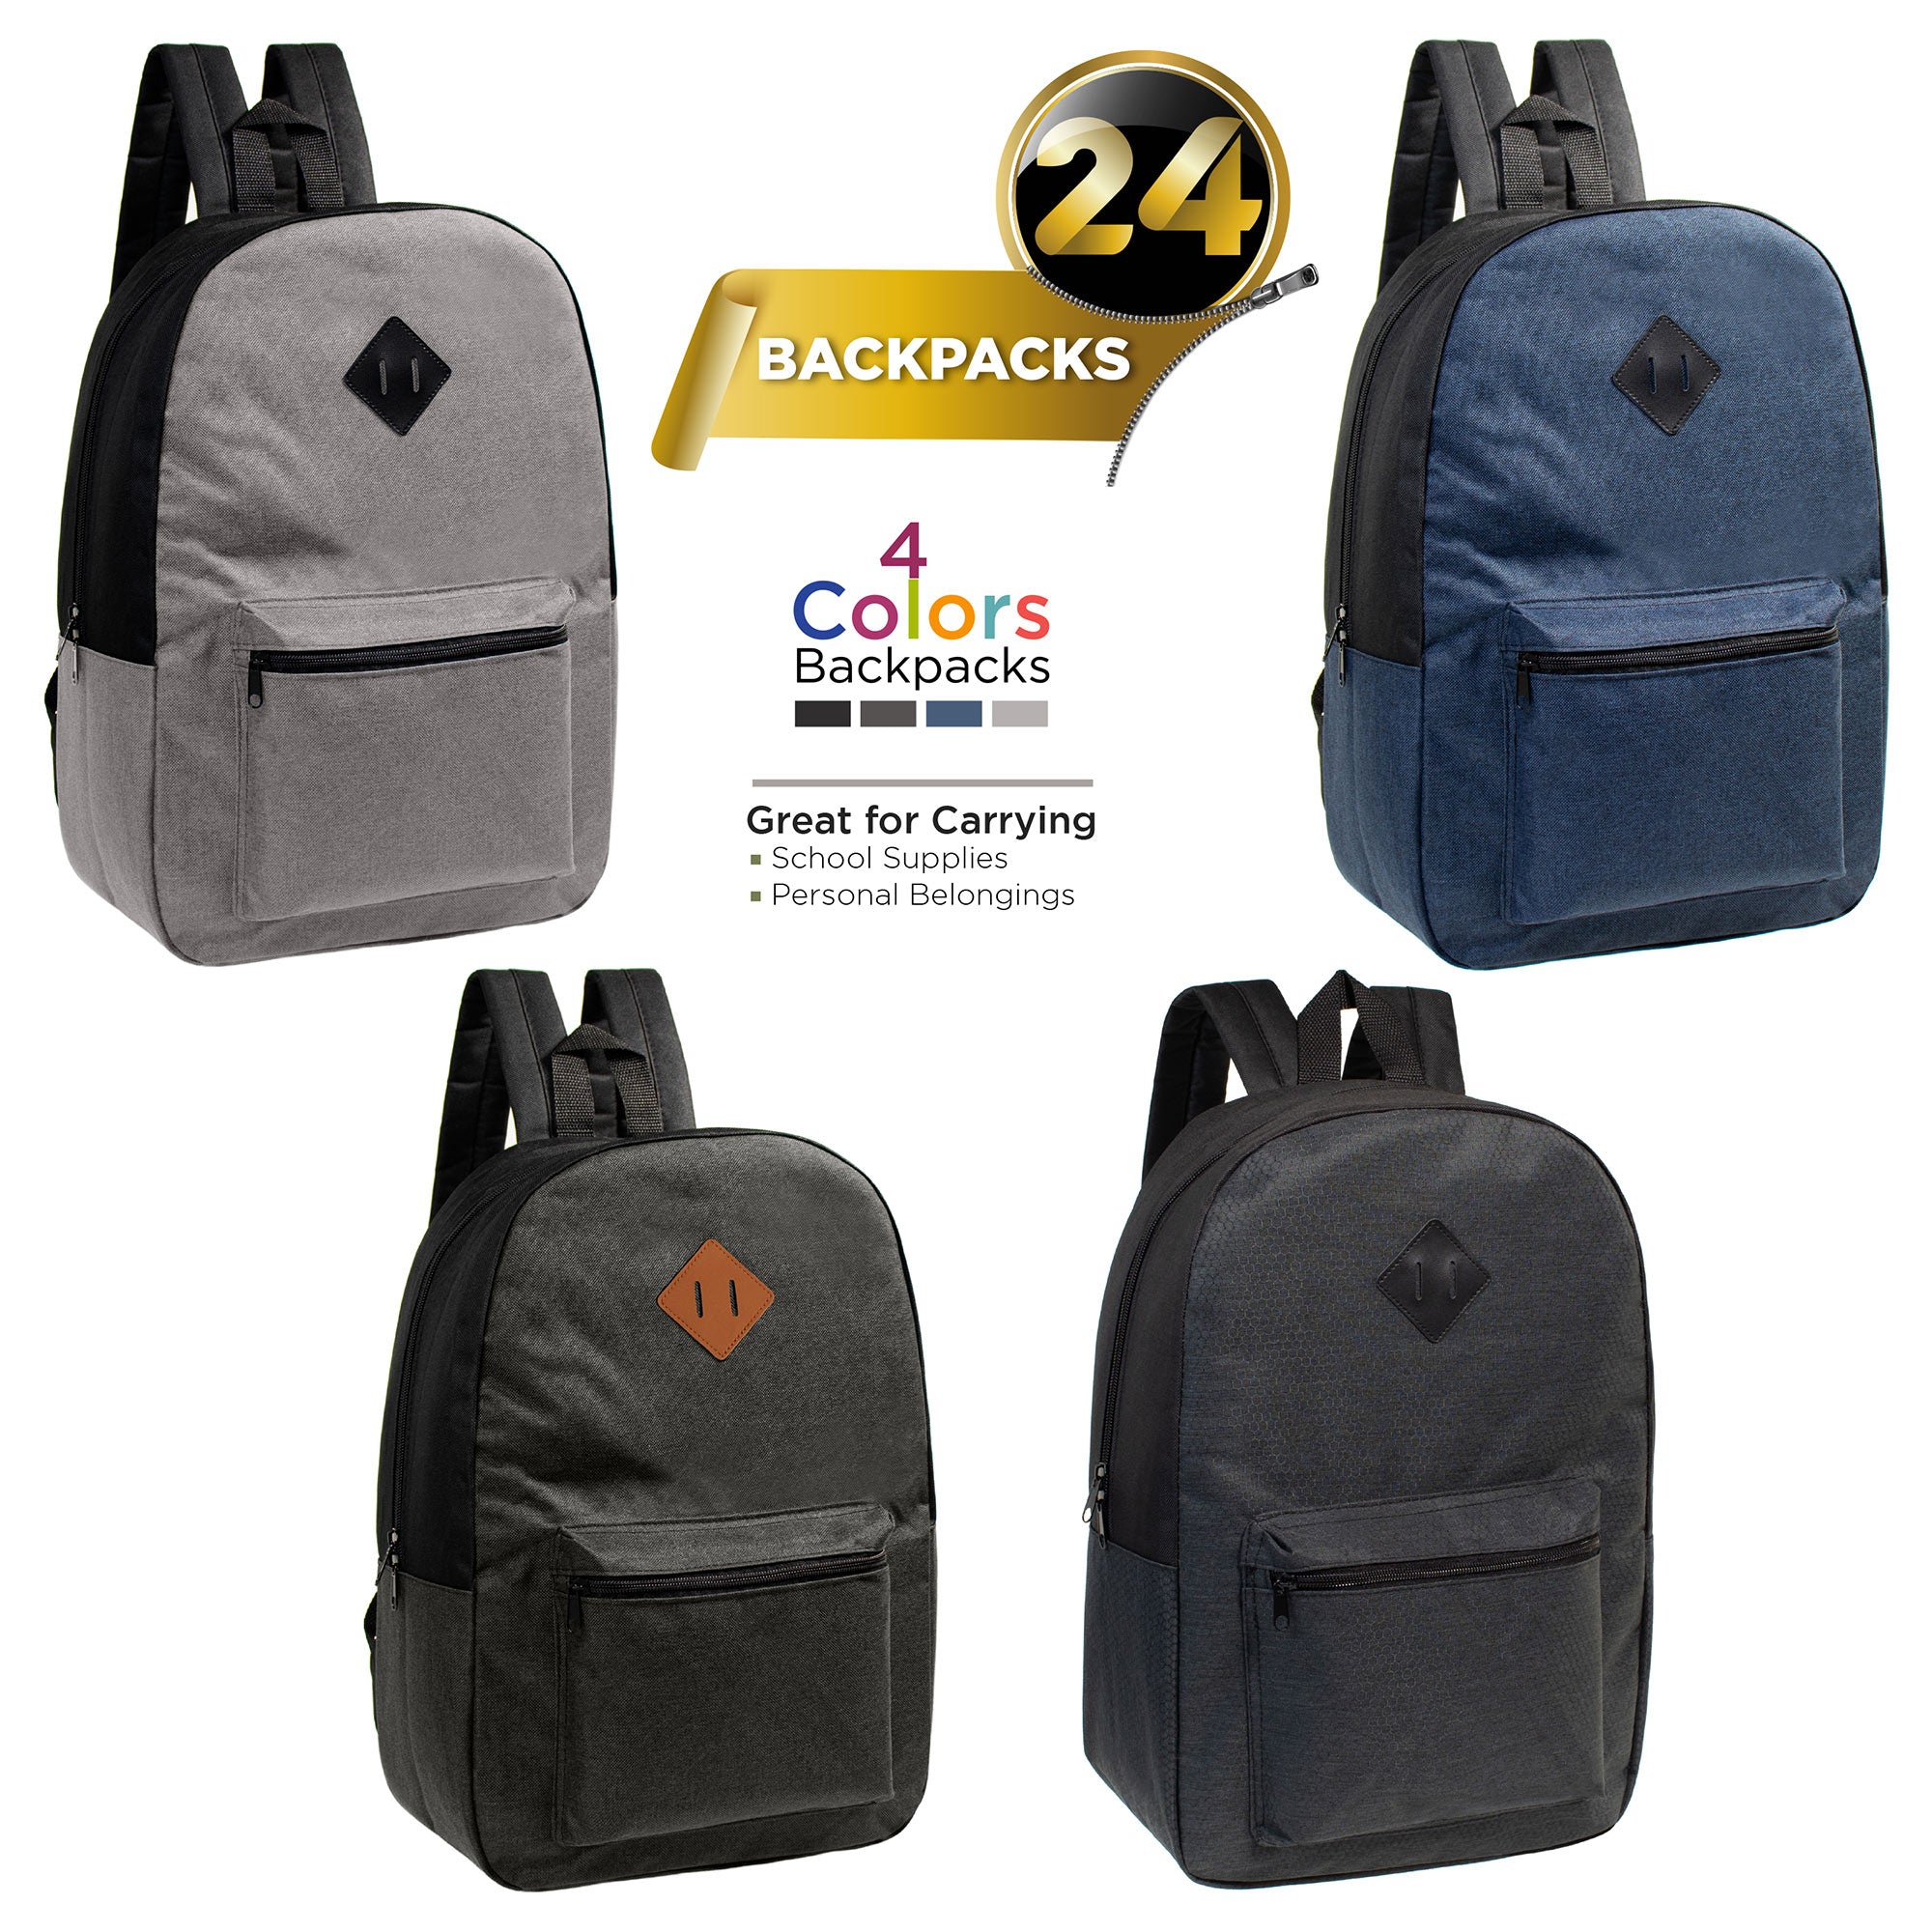 bulk backpacks in assorted colors for boys and girls students BAPA-310-24